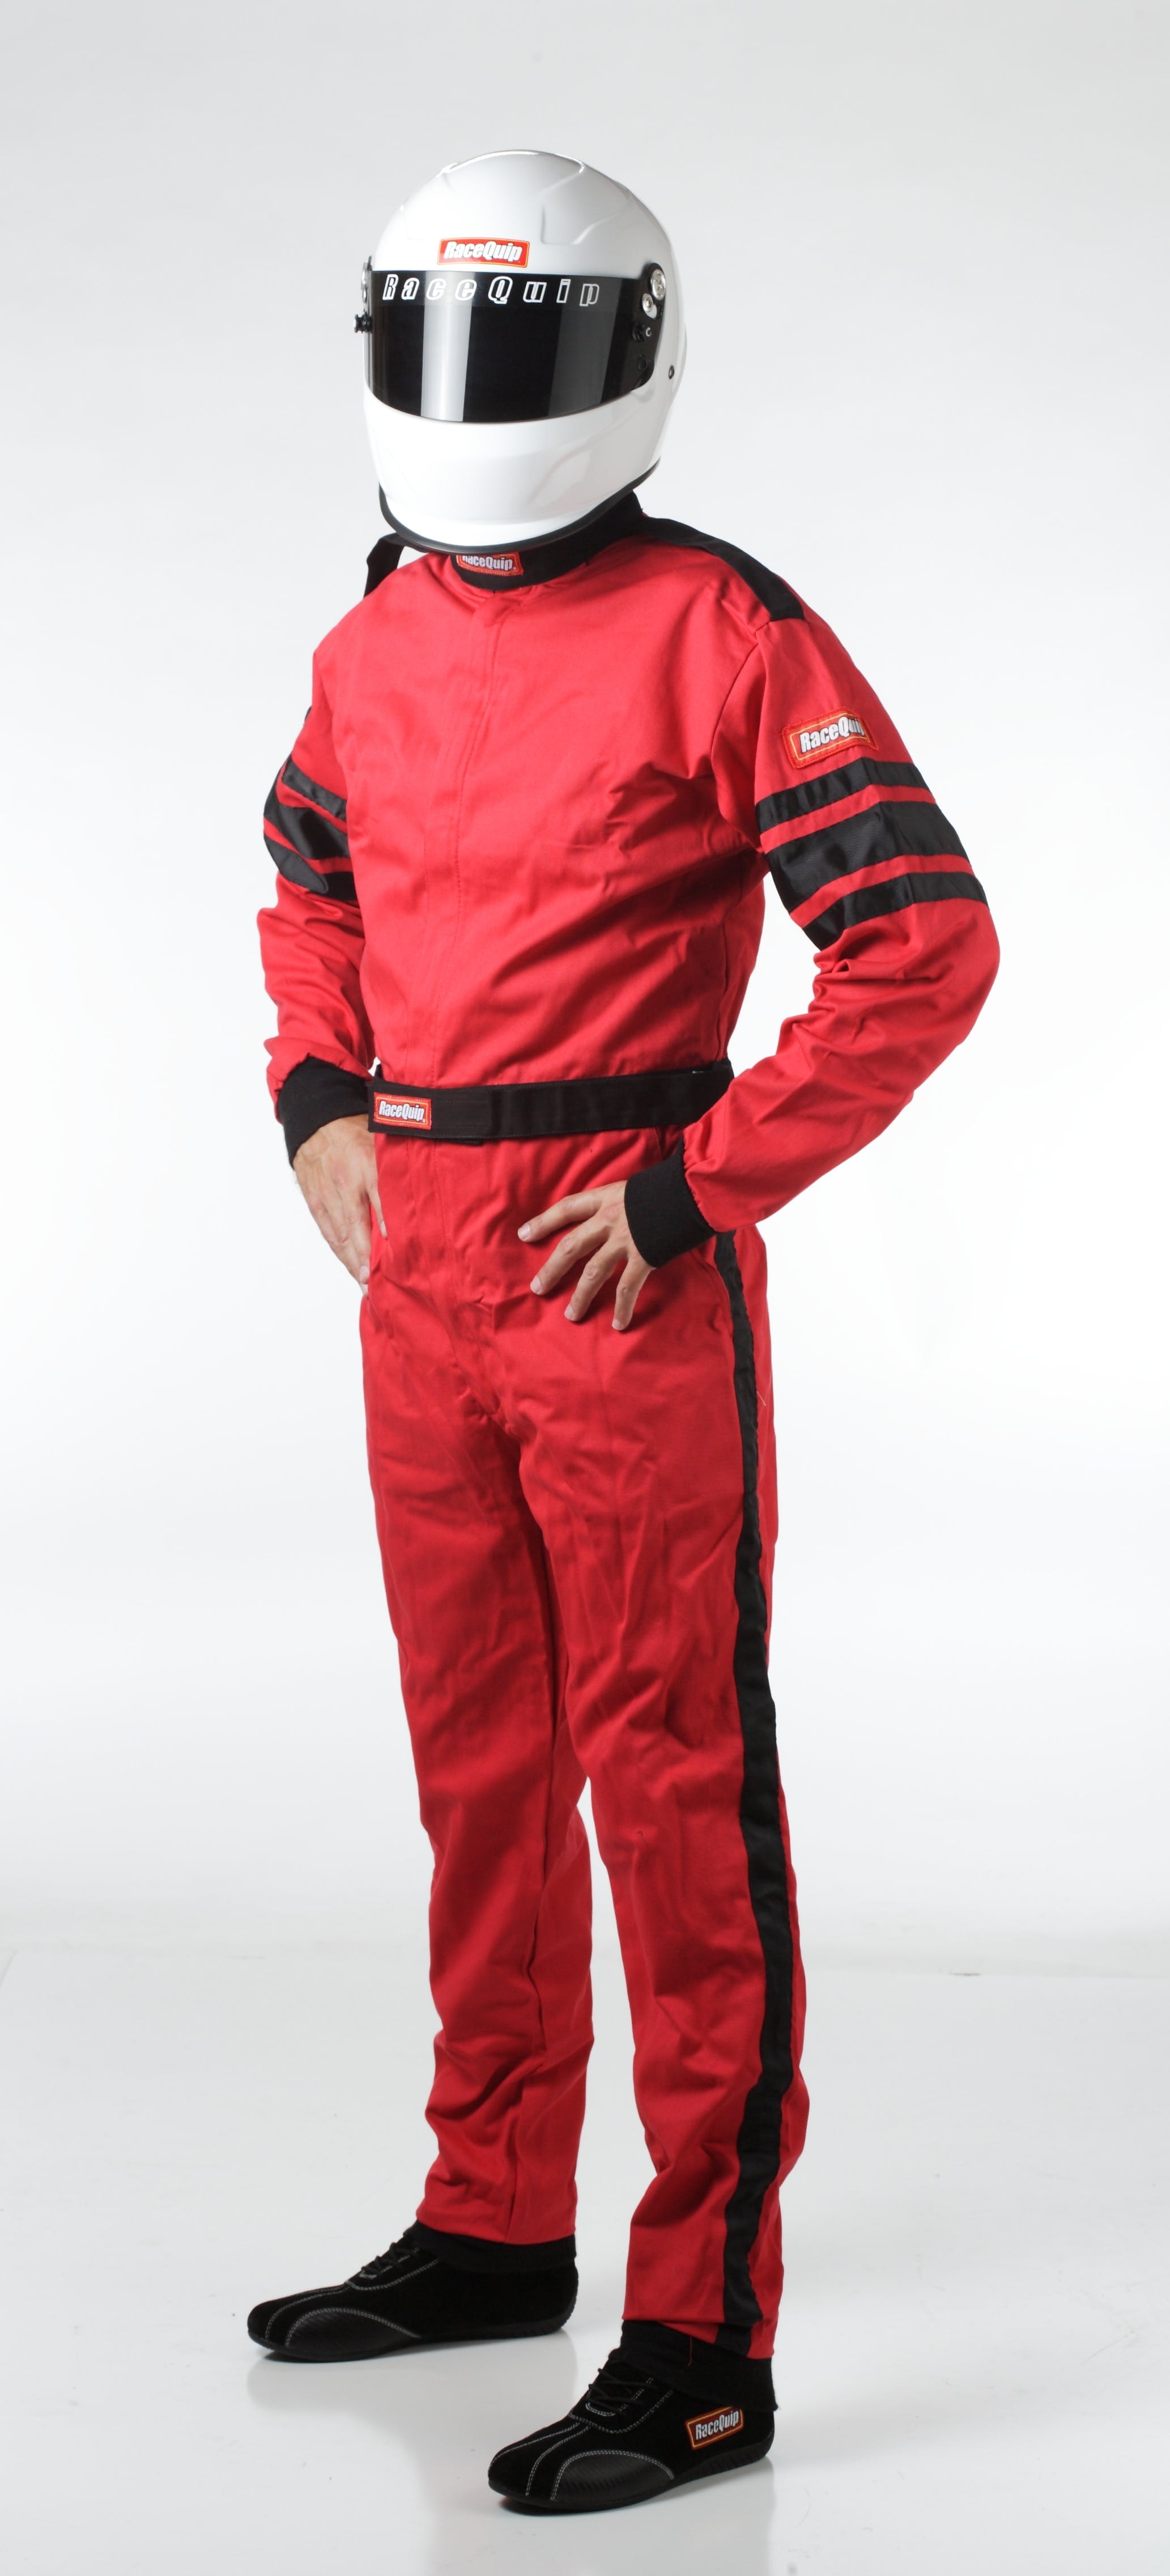 RaceQuip 110015 SFI-1 Pyrovatex One-Piece Single-Layer Racing Fire Suit (Red, Large)